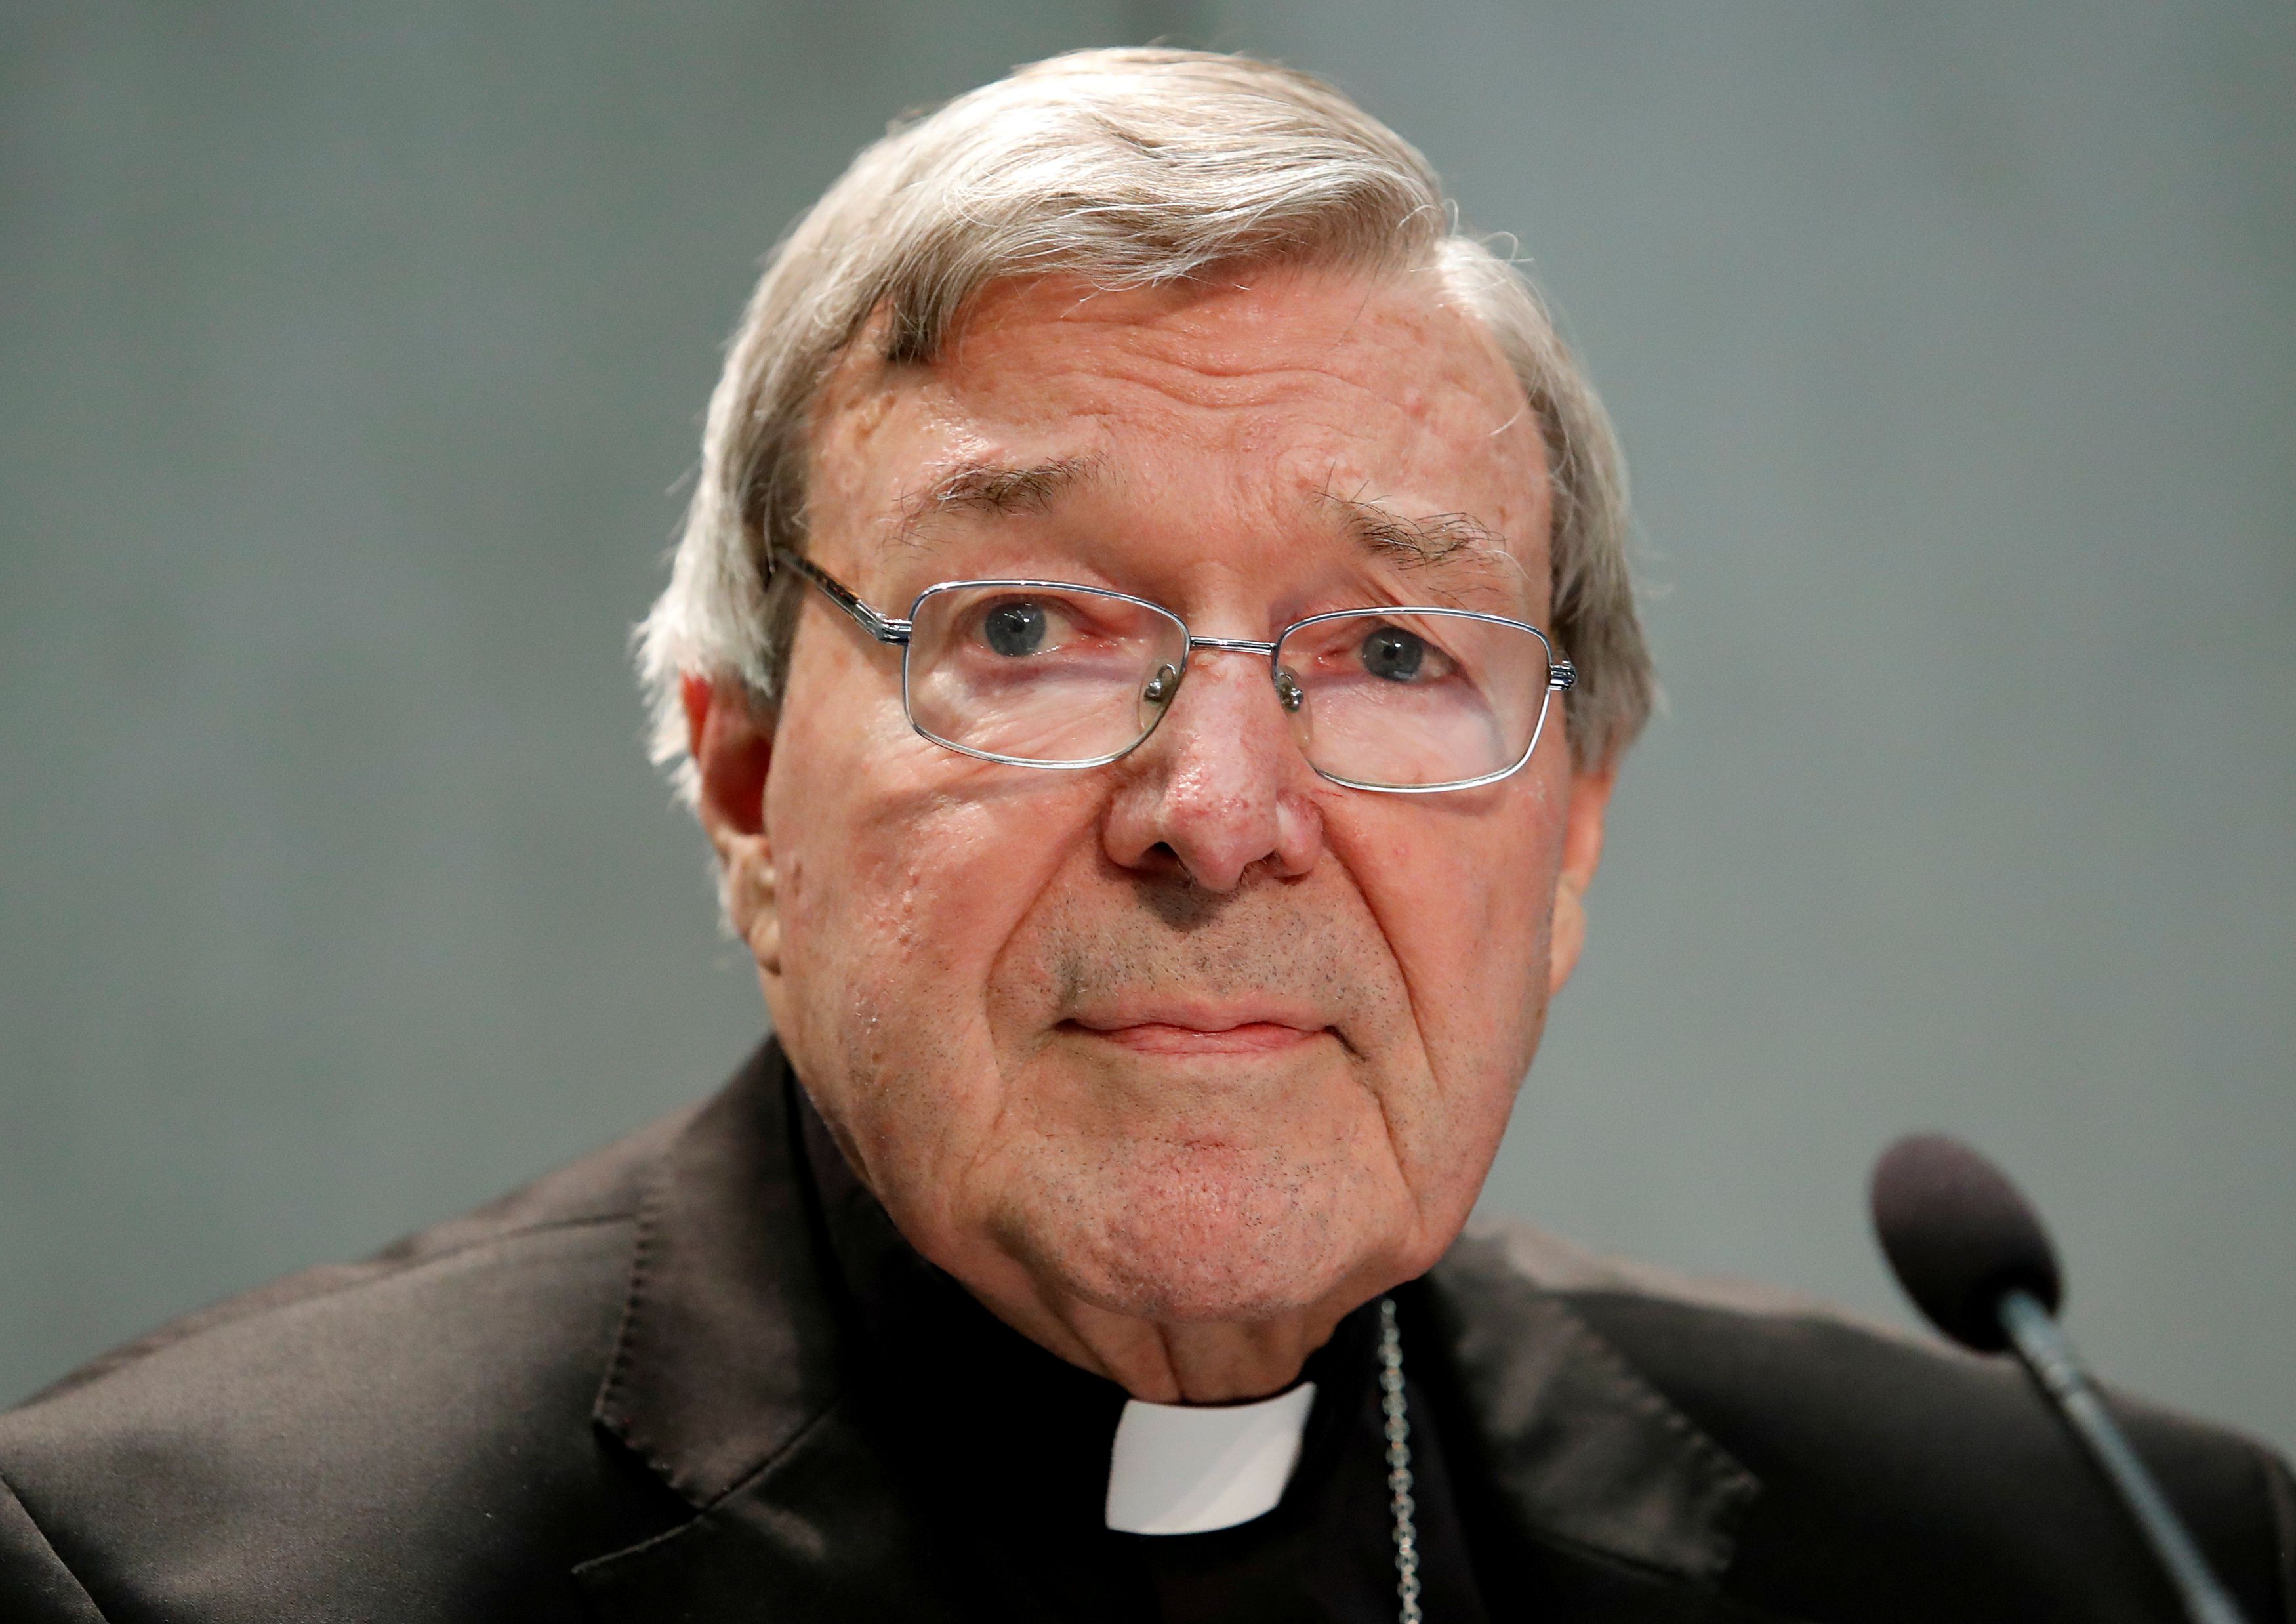 Pell mourned at Sydney cathedral, police try to stop protest